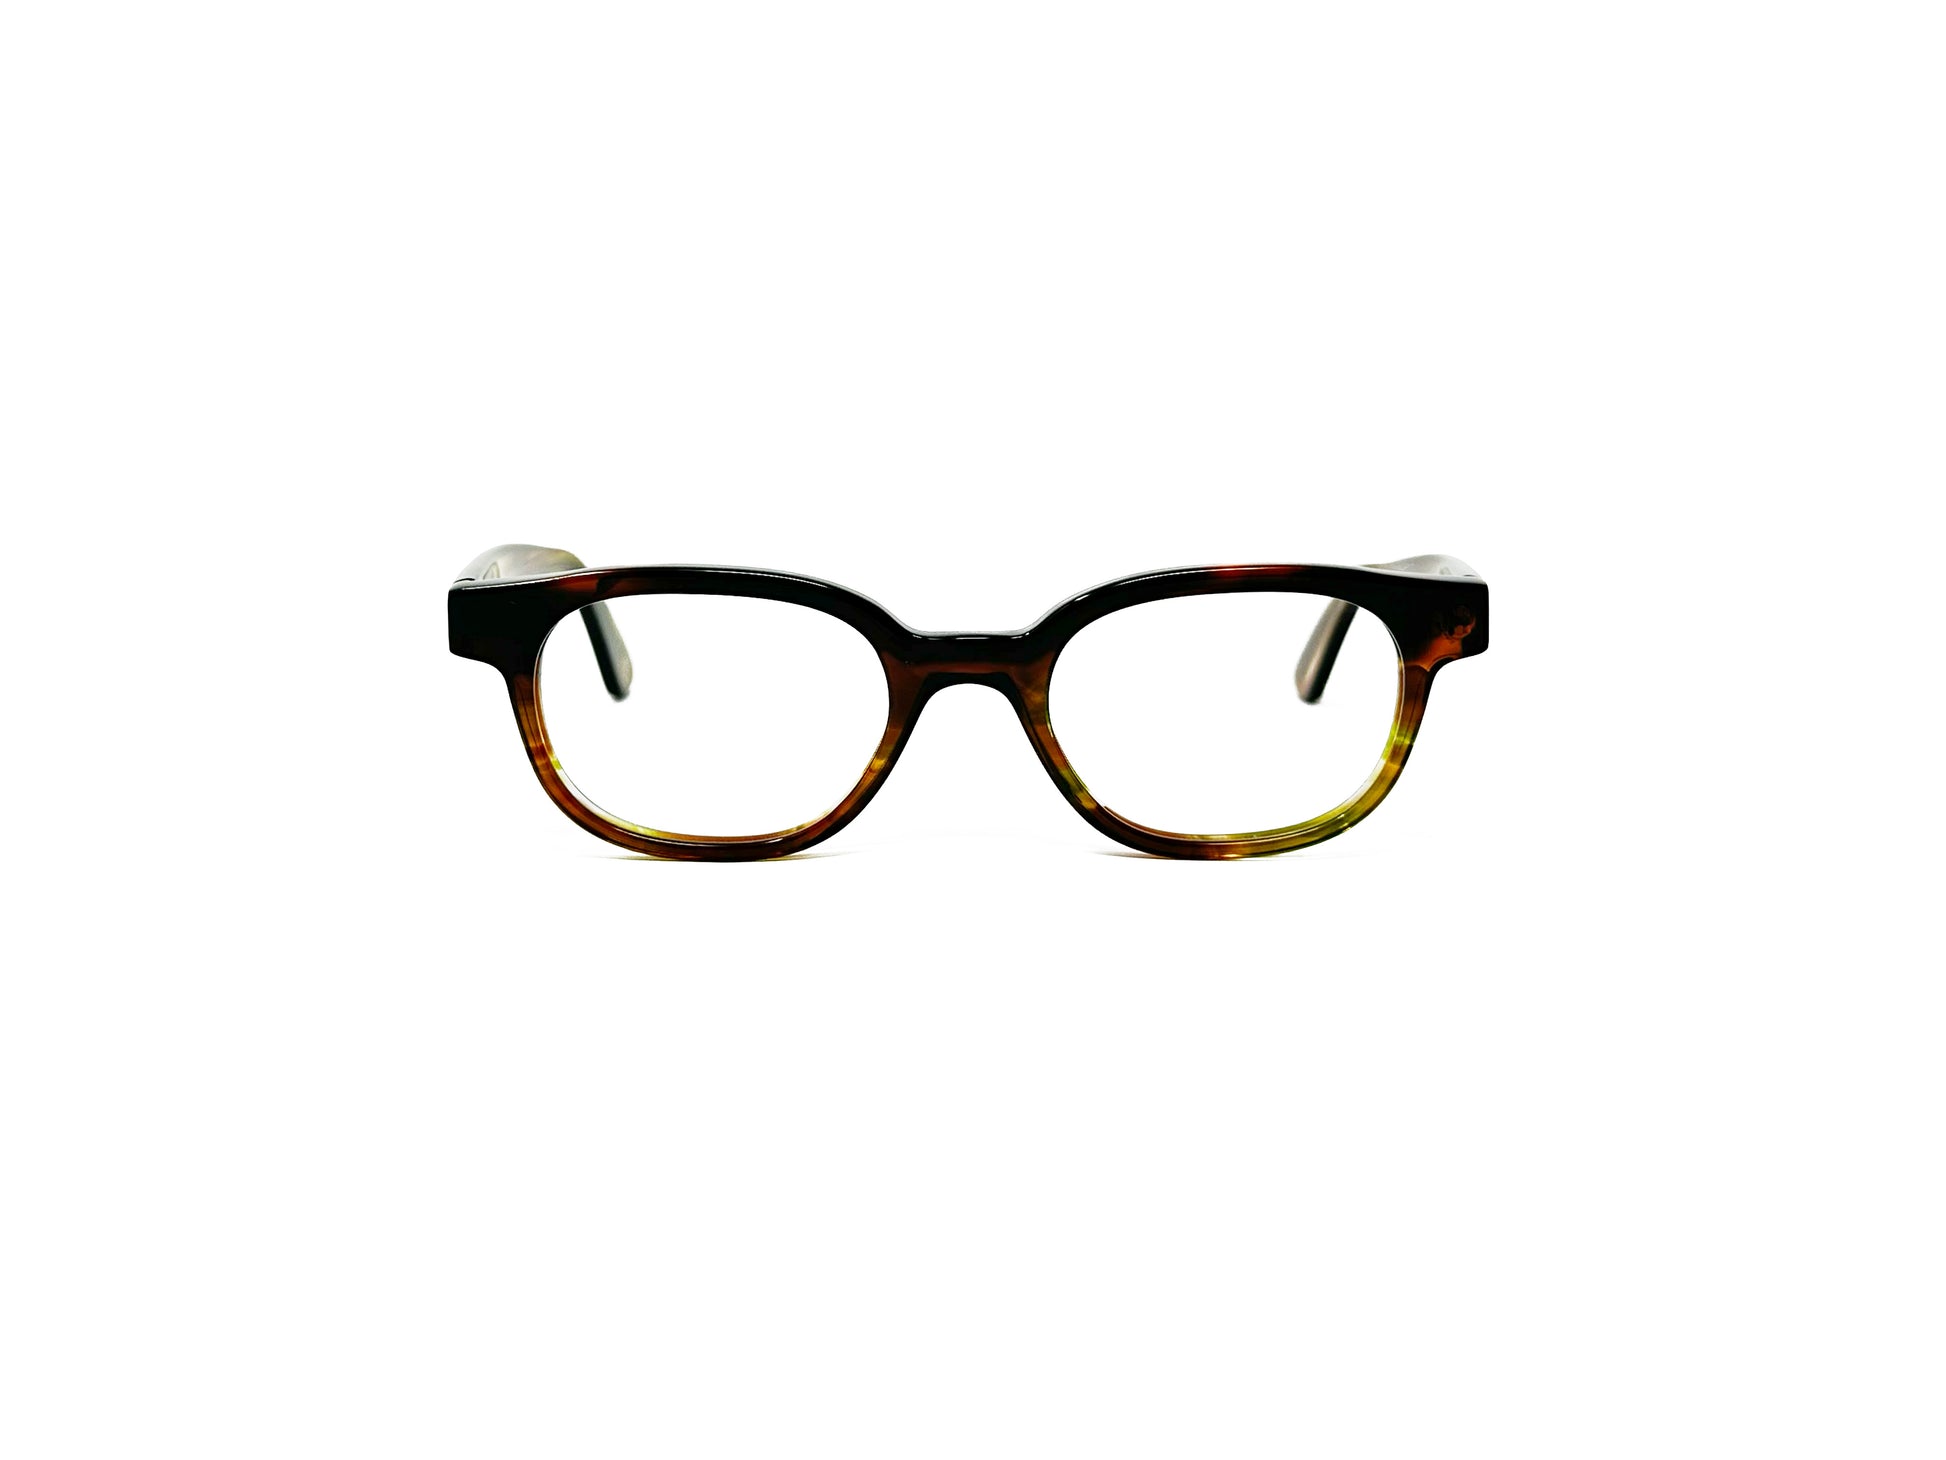 Viktlos rounded-rectangular acetate optical frame. Model: 2582H. Color: 2281 - Brown with slightly transparent bottoms. Front view. 